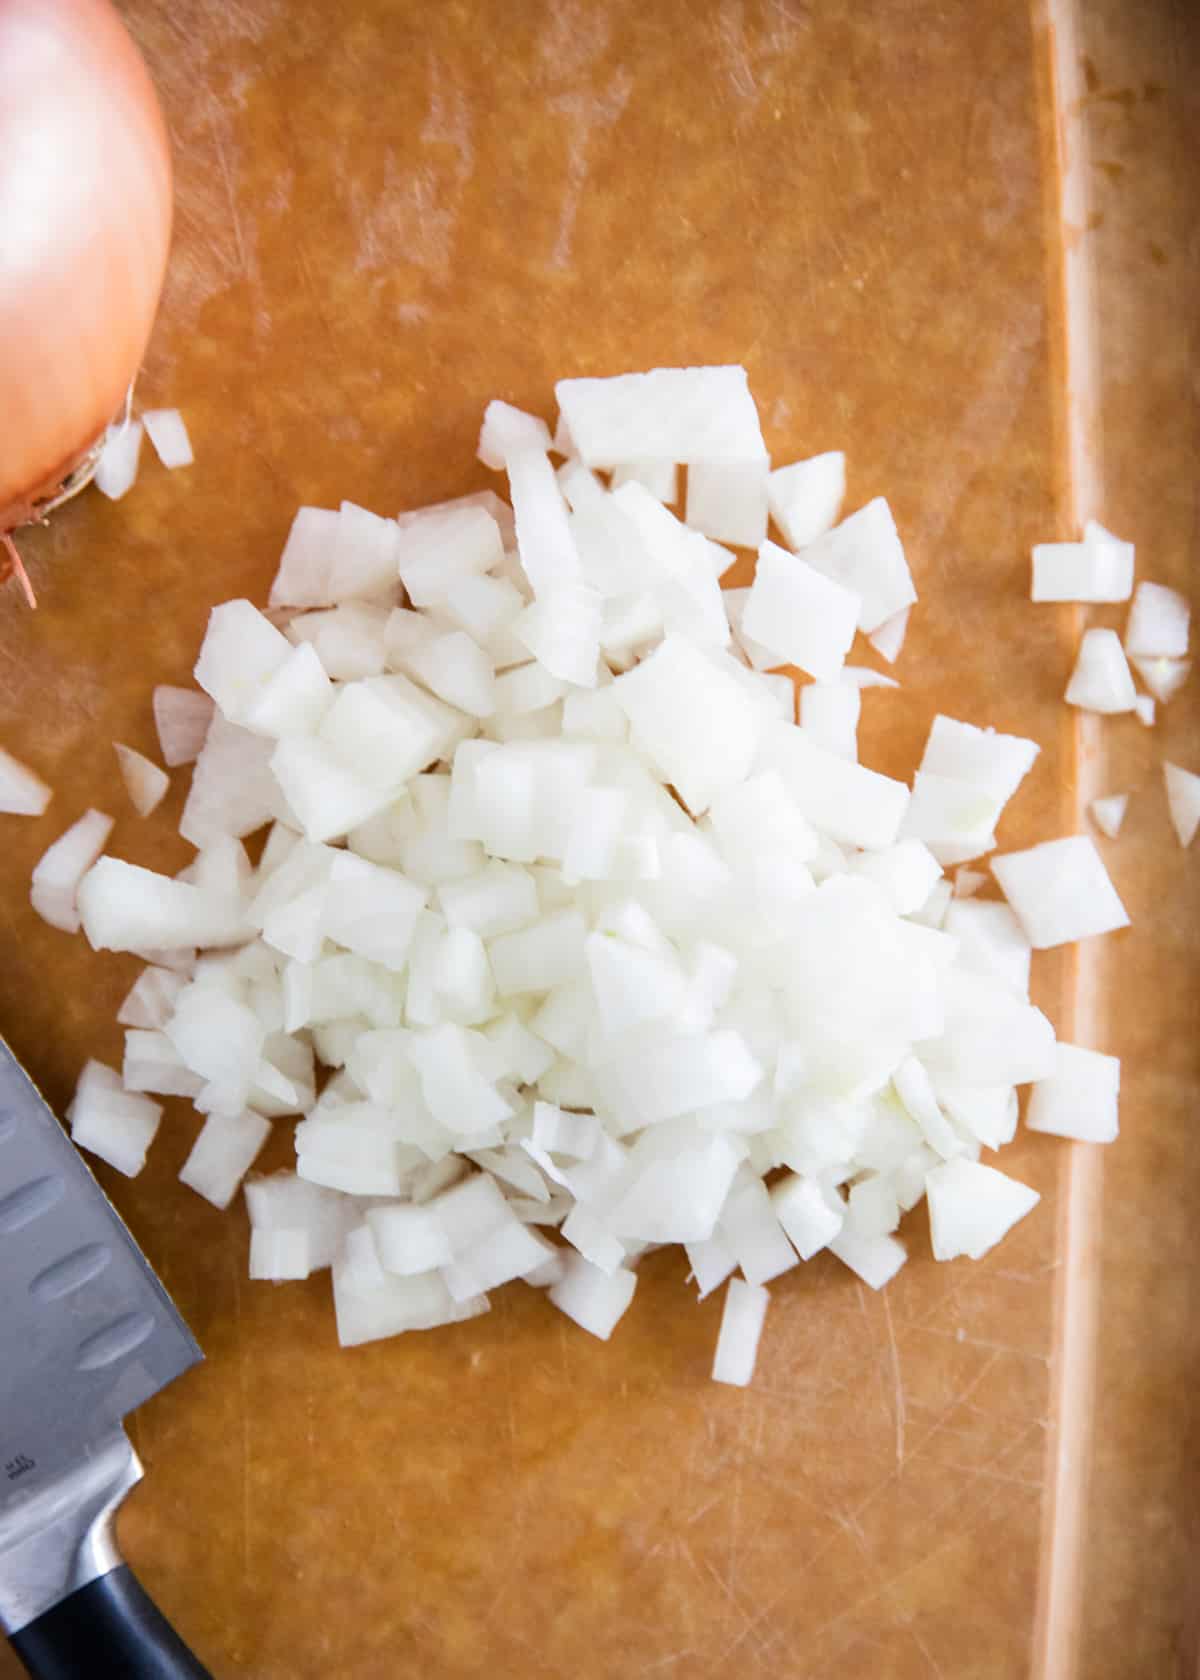 Dicing onions on cutting board.